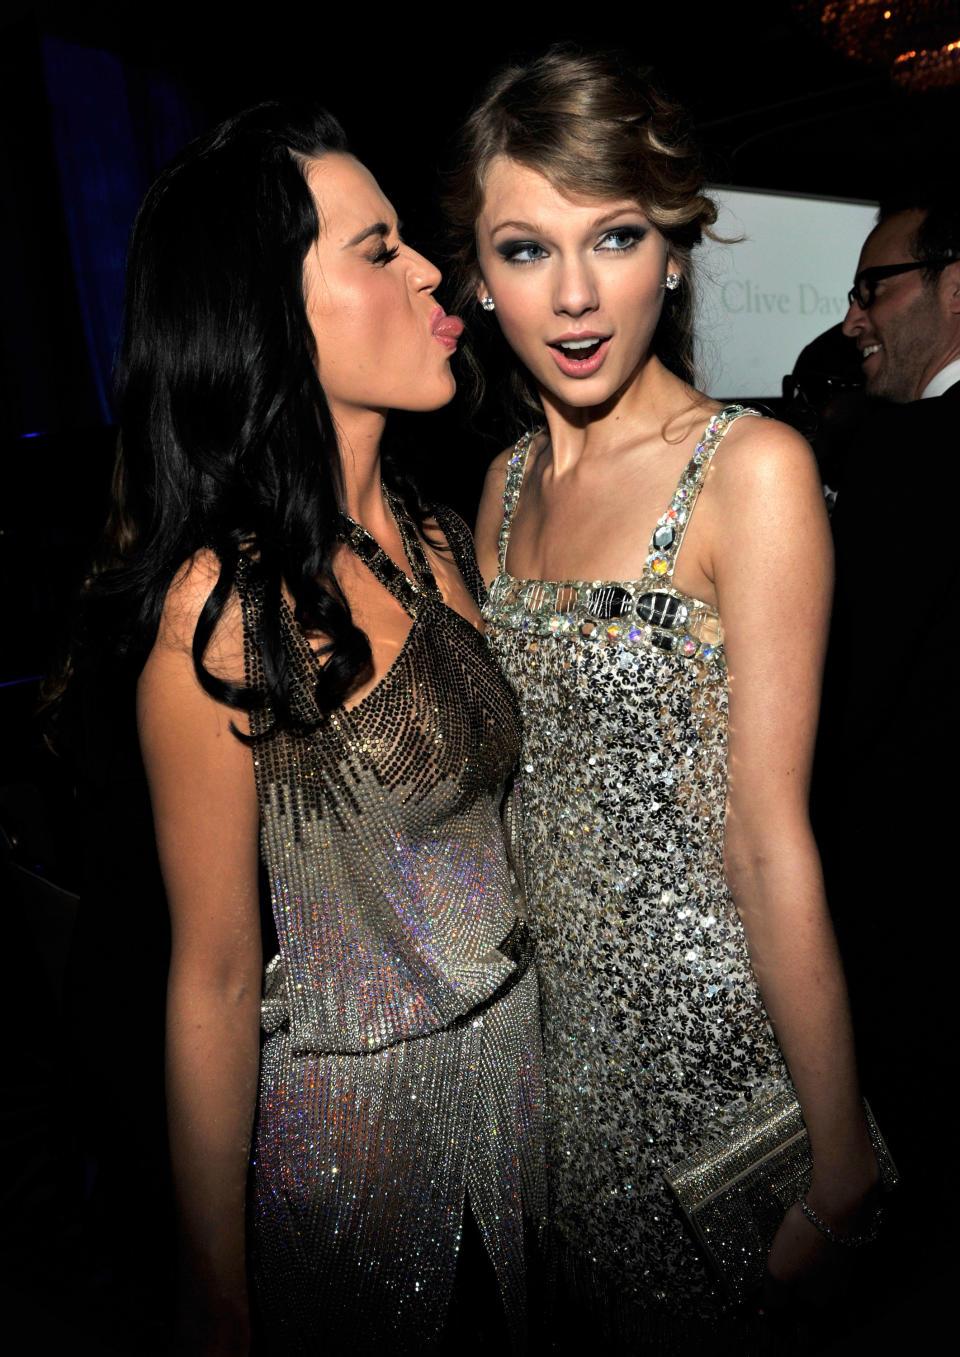 Katy Perry and Taylor Swift at the 2010 GRAMMY Awards